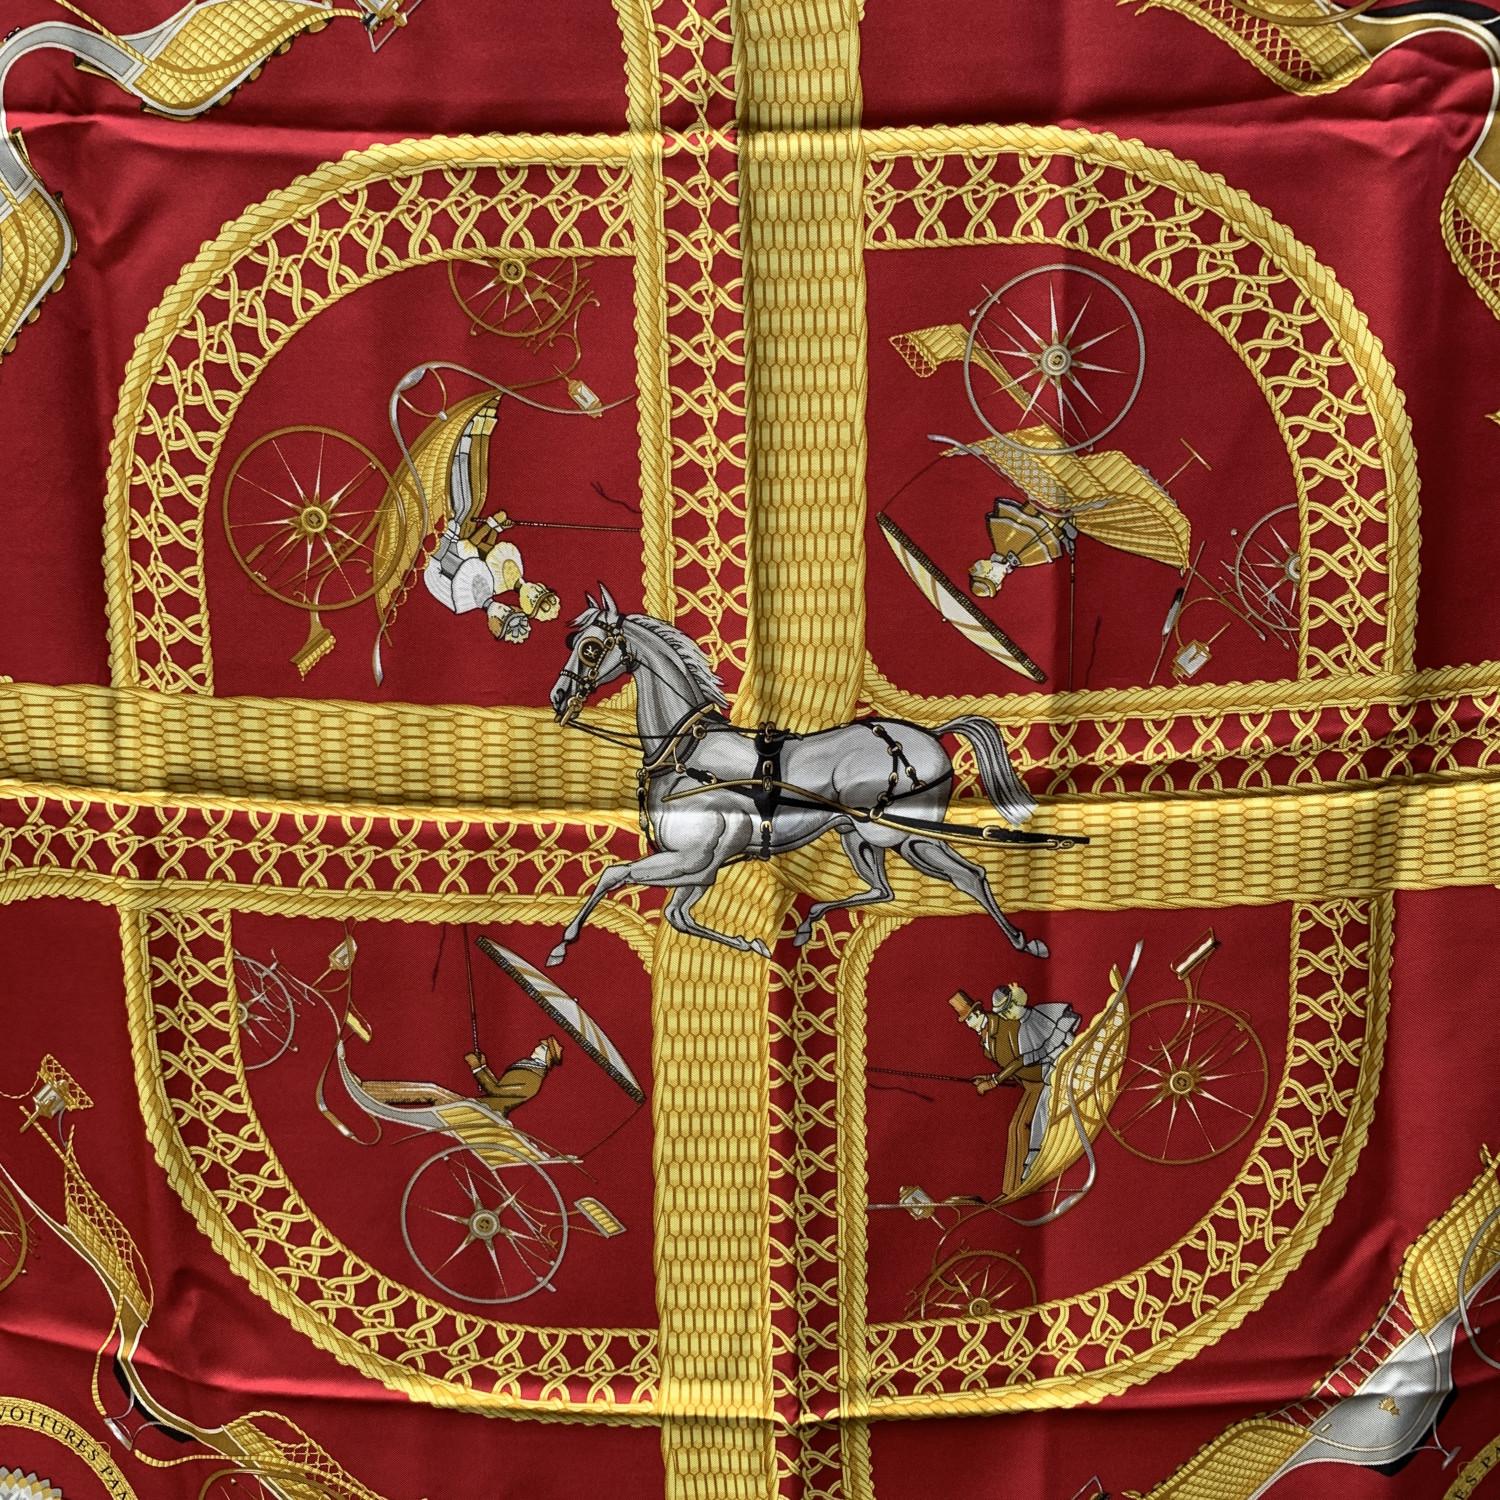 Hermes Paris Vintage Silk Scarf 'Voitures Paniers ' . Artist :Julie Abadie. First Issue : 1984. Main colors are red and yellow. Hand rolled hem. Fabric / Material: 100% Silk. Approx measurements: 35 x 35 inches - 88,8 x 88,8 cm.

Details

MATERIAL: